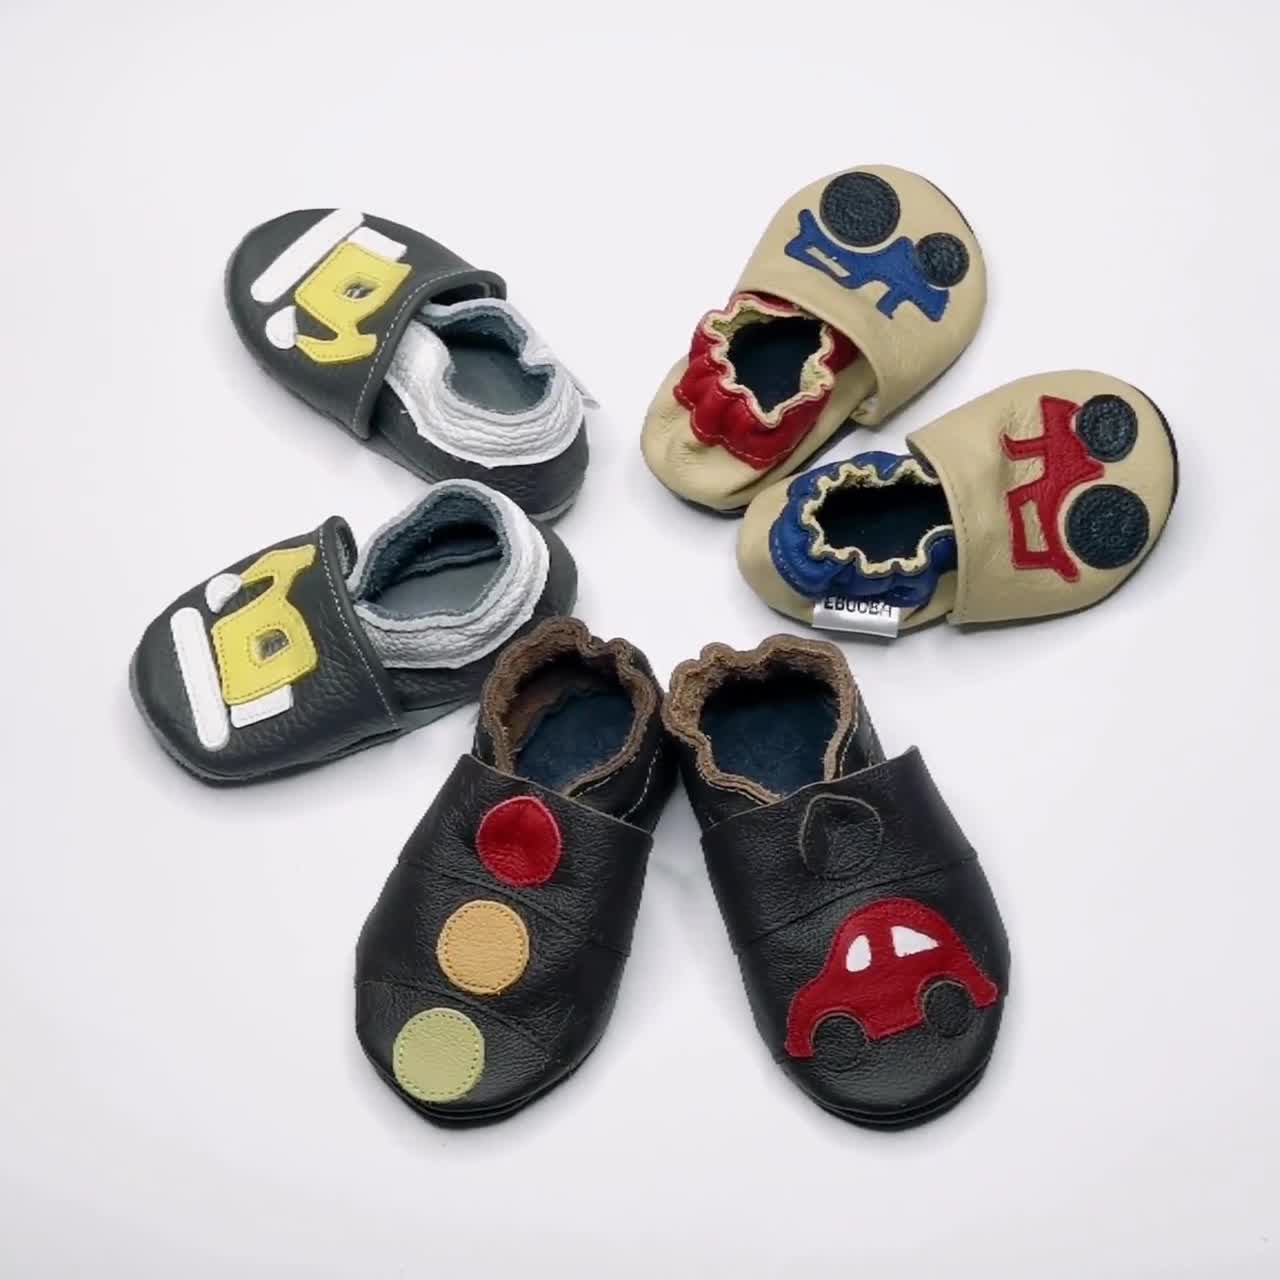 Baby Shoes Soft Leather 0-6 6-12 12-18 18-24 years old 